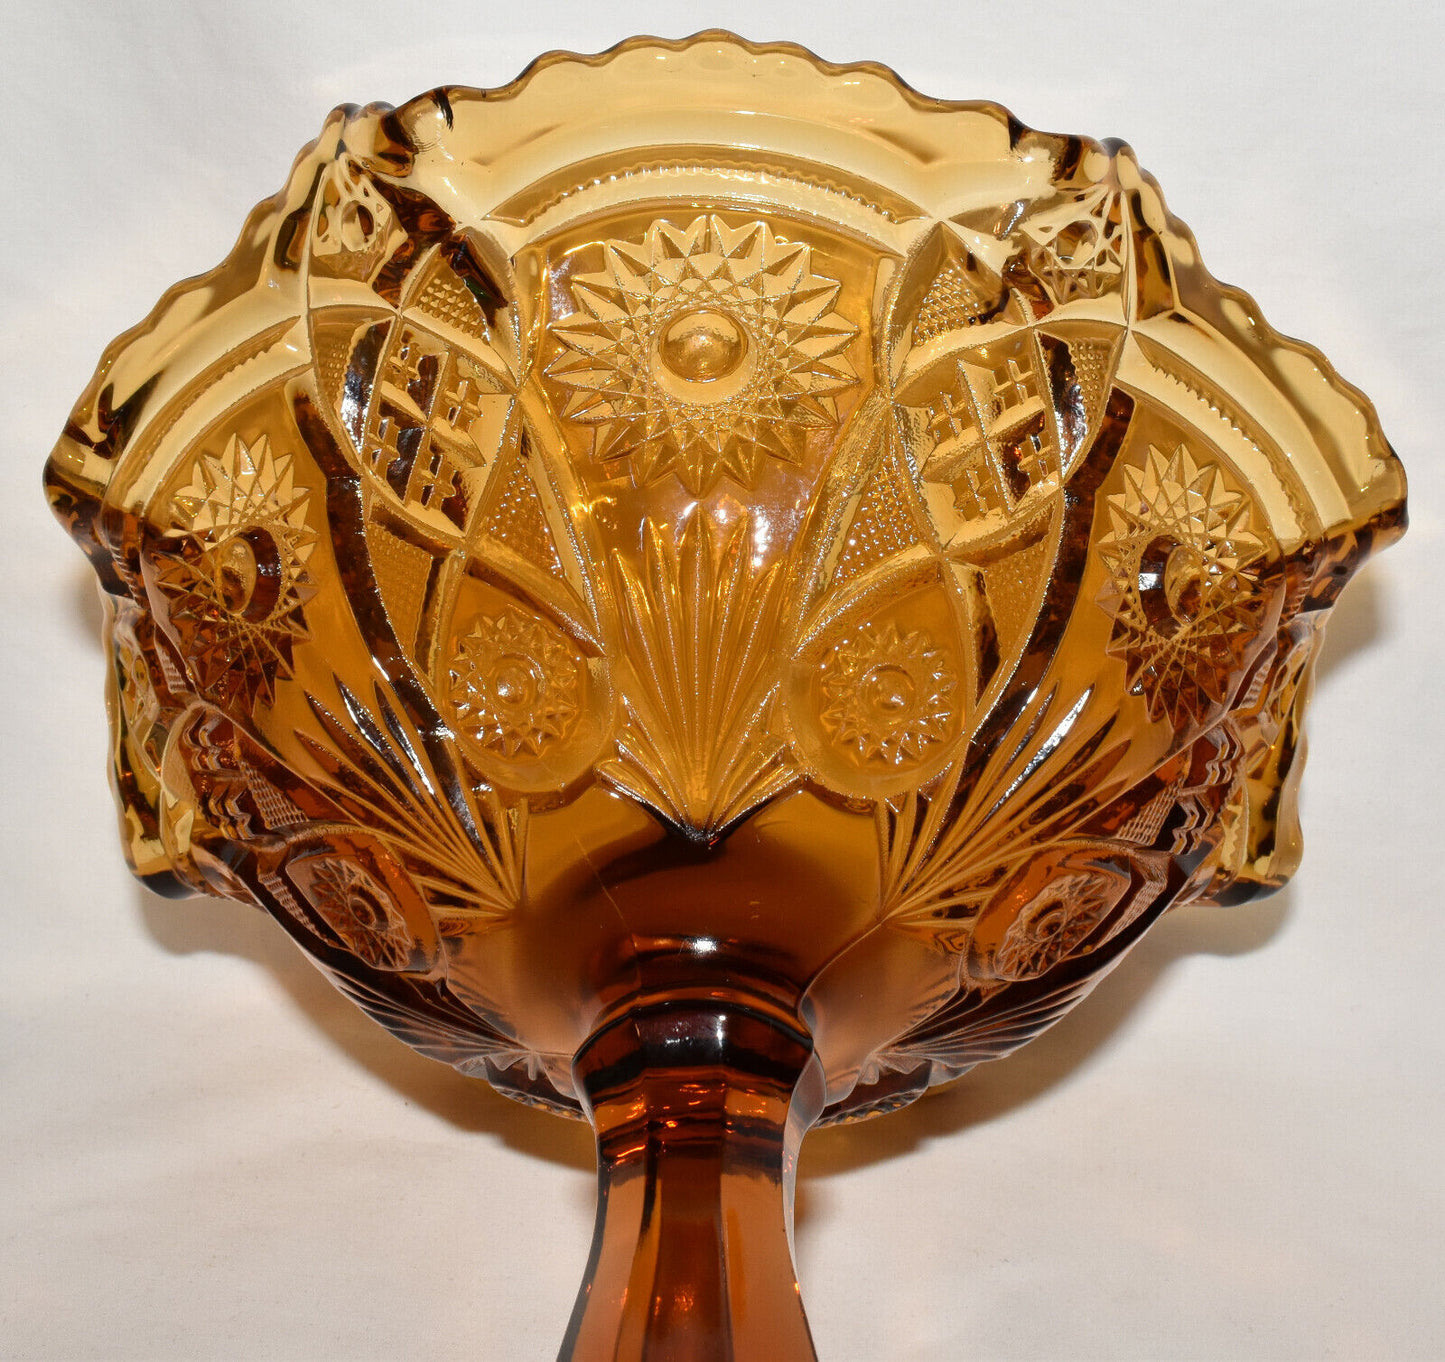 Vintage Imperial Glass Large Amber Compote Pedestal Bowl Display Centerpiece